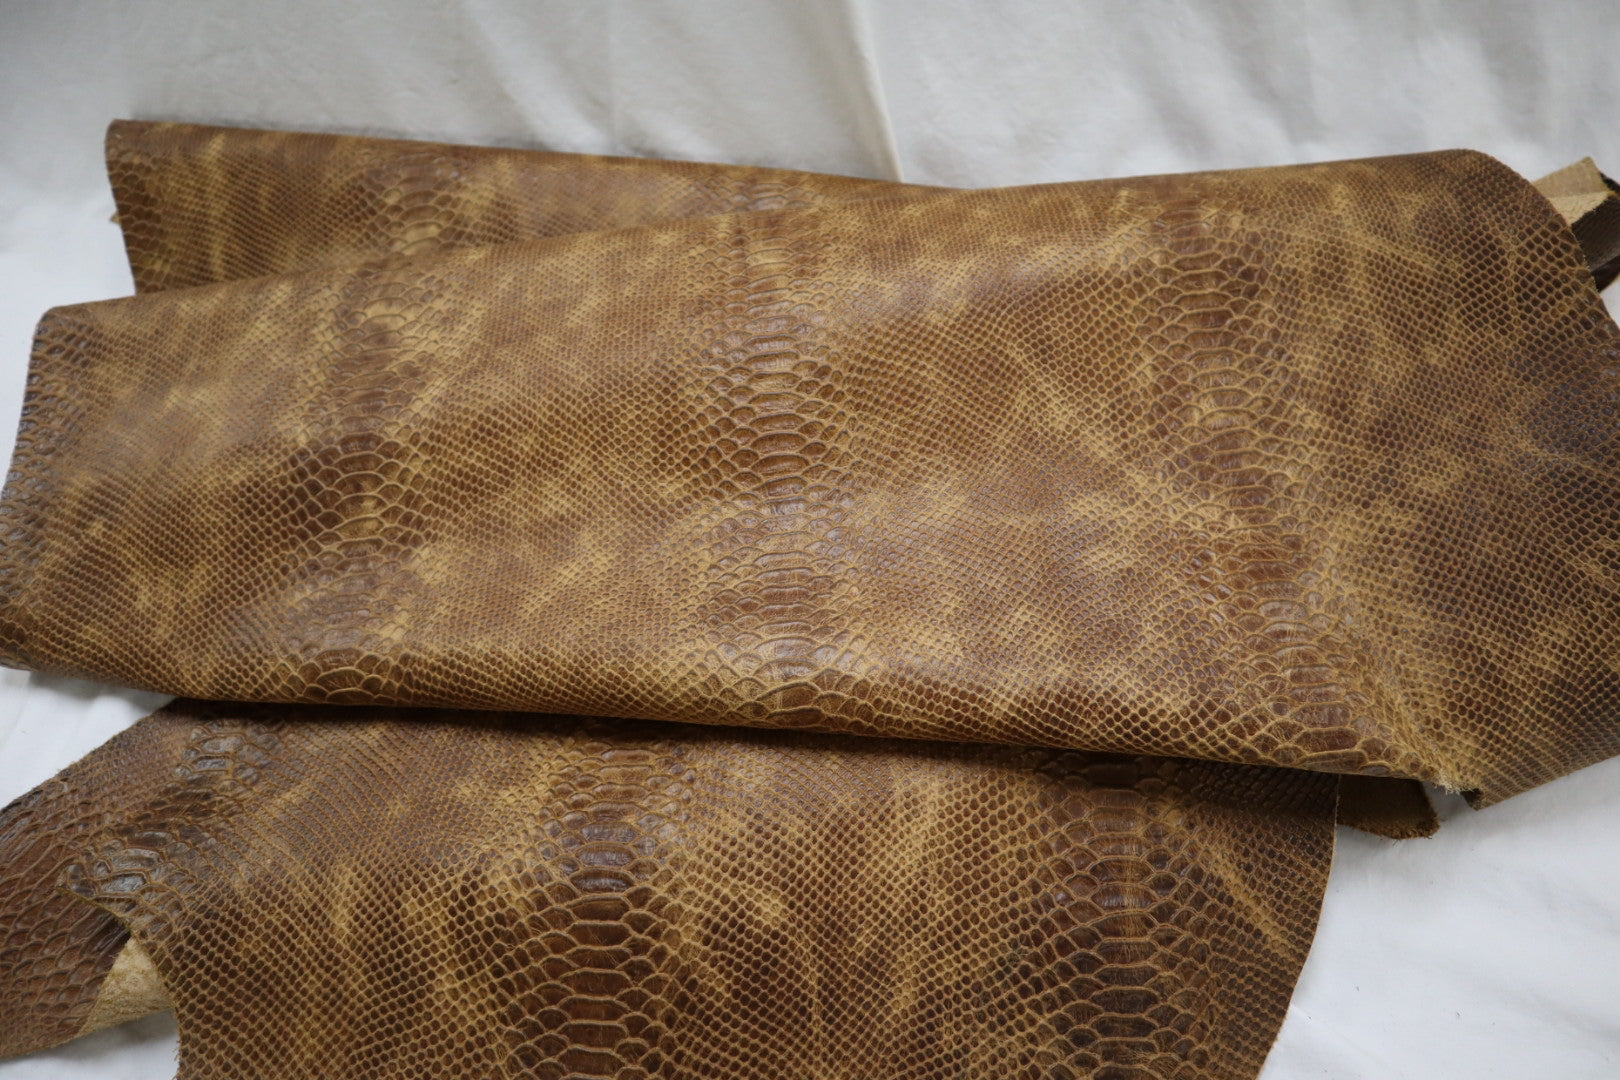 mighty mend it consumer report on leather duster with anaconda snakeskin!!  